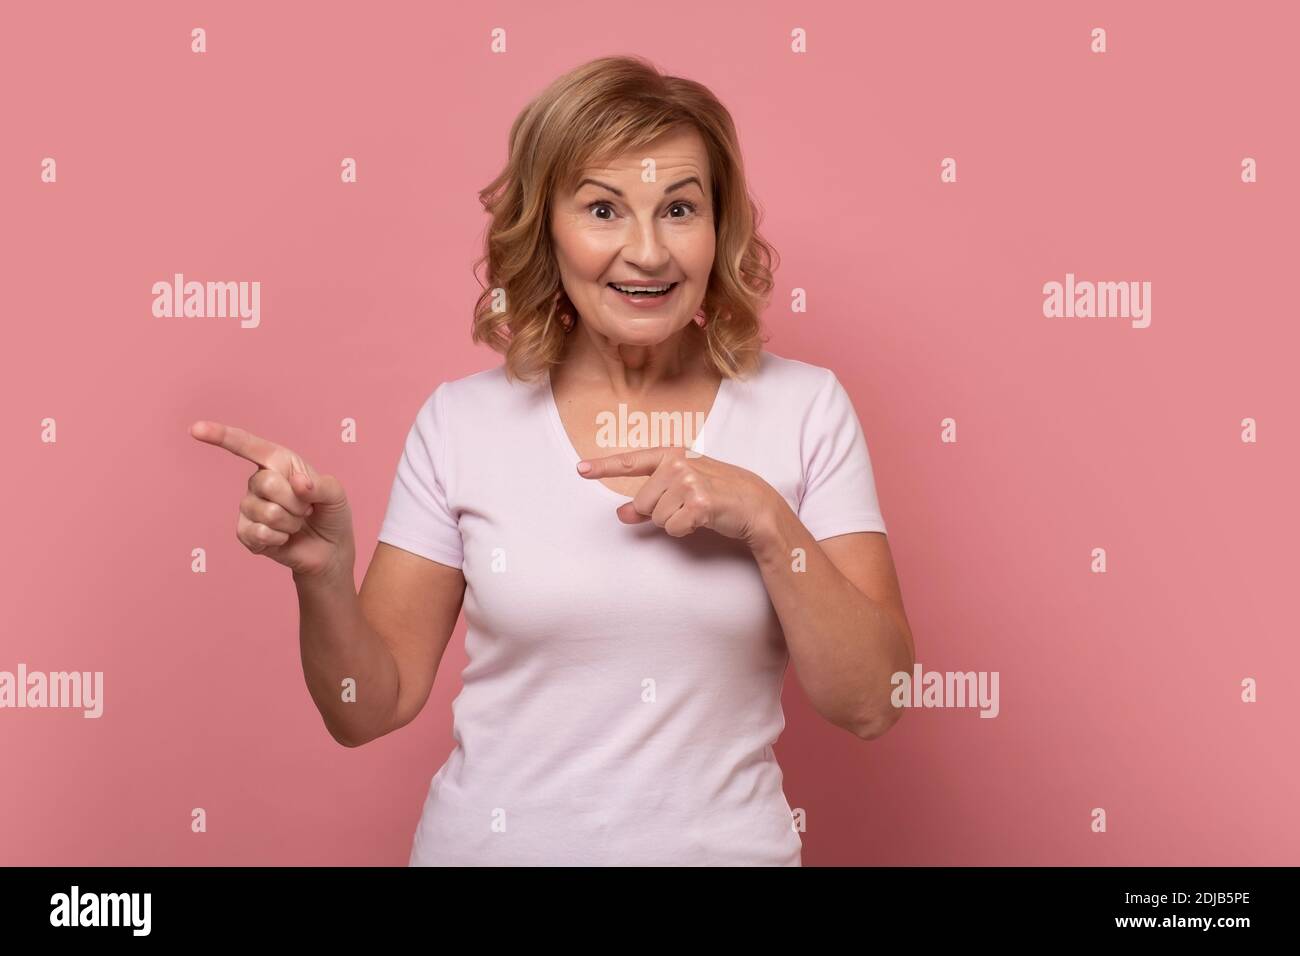 Check this out. Senior woman smiling cheerfully and pointing with forefingers away, indicating copy space on yellow wall, having joyful happy look Stock Photo